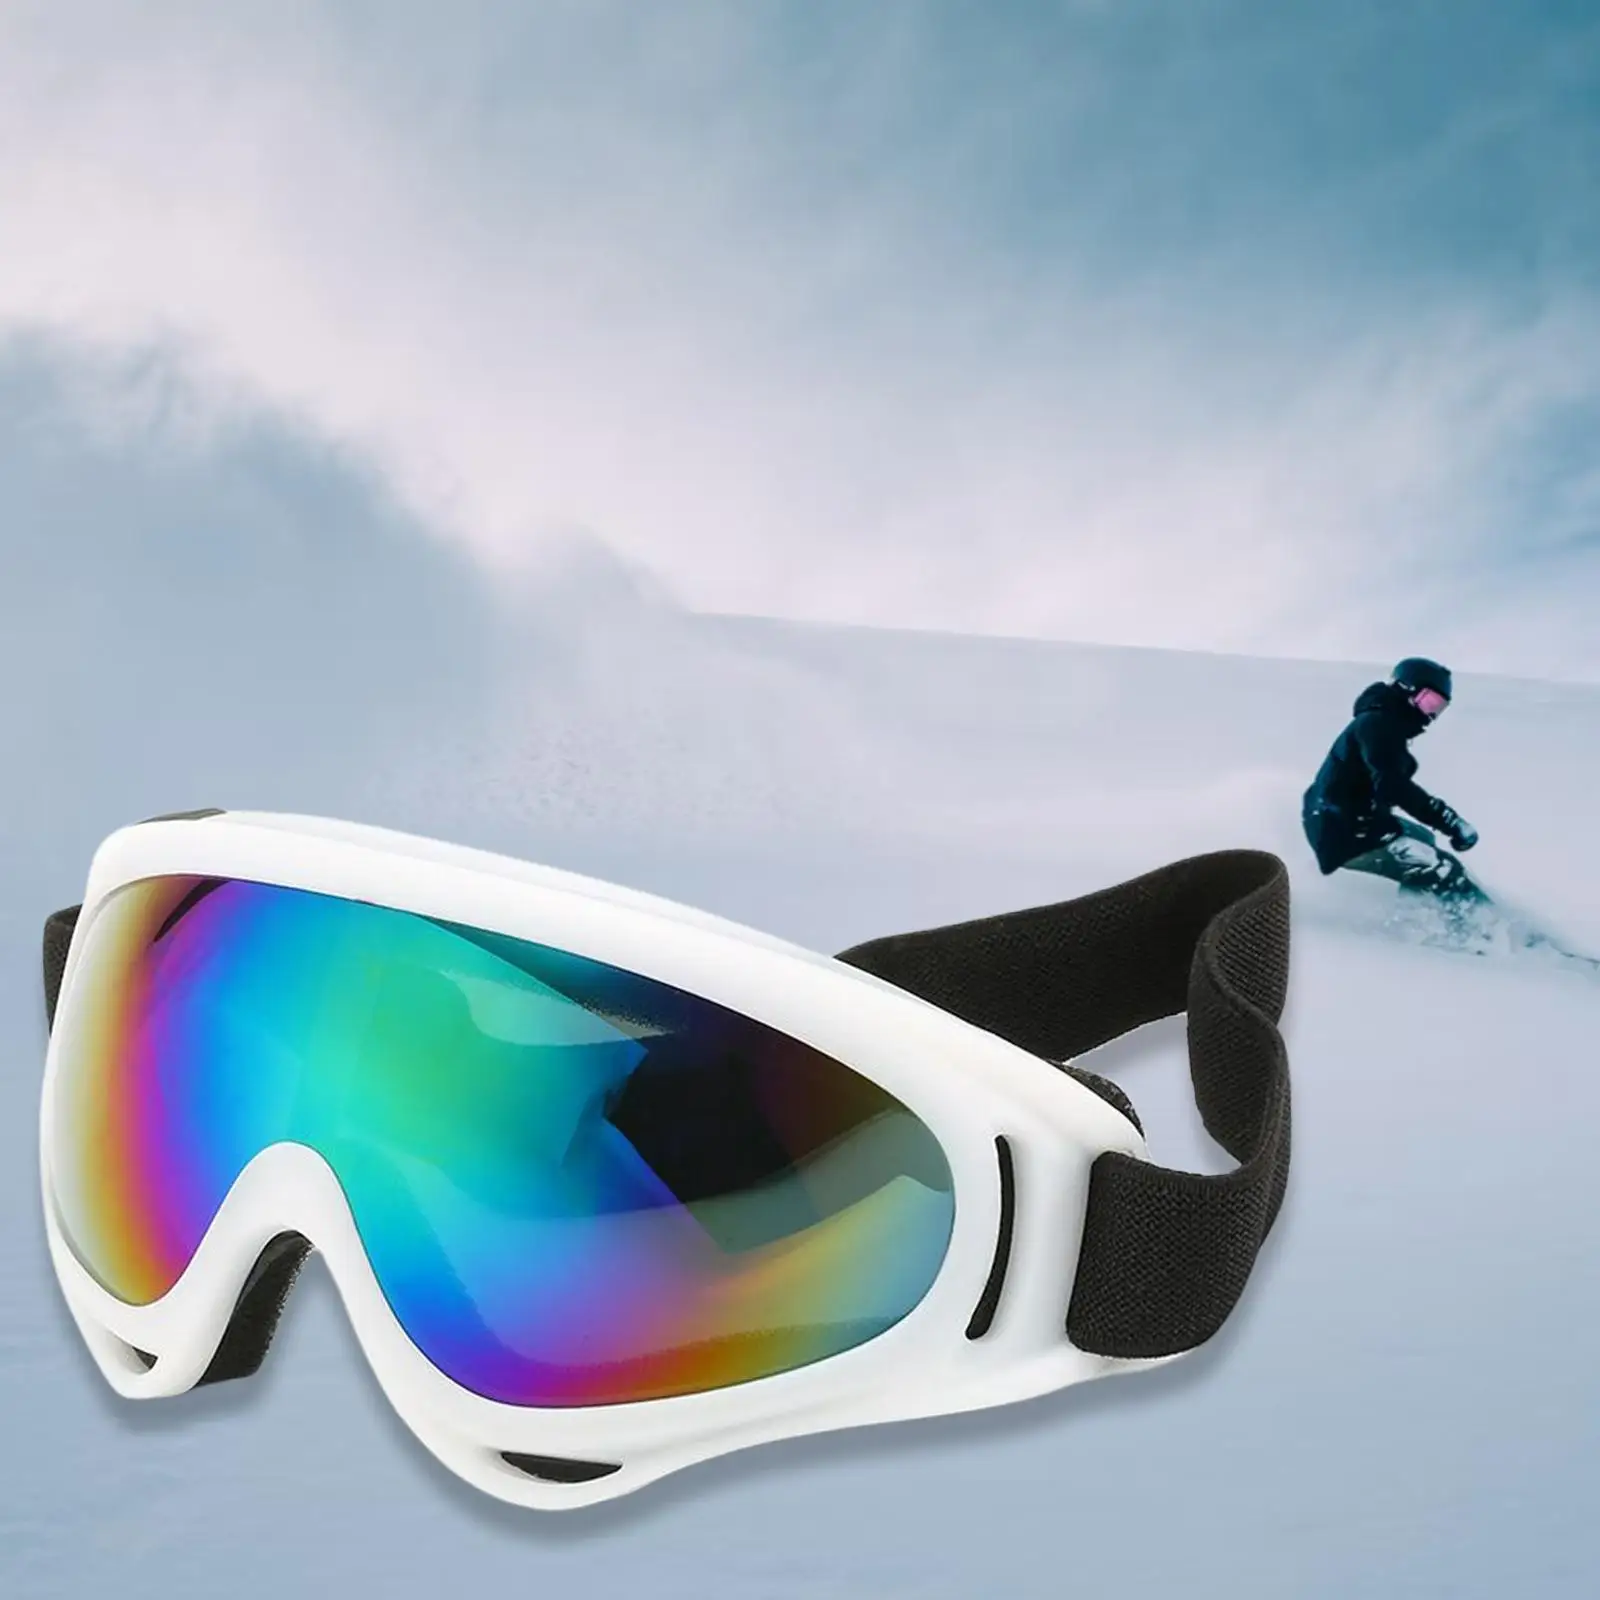 Goggles Glasses Sunglasses Motorcycle Protective Windproof